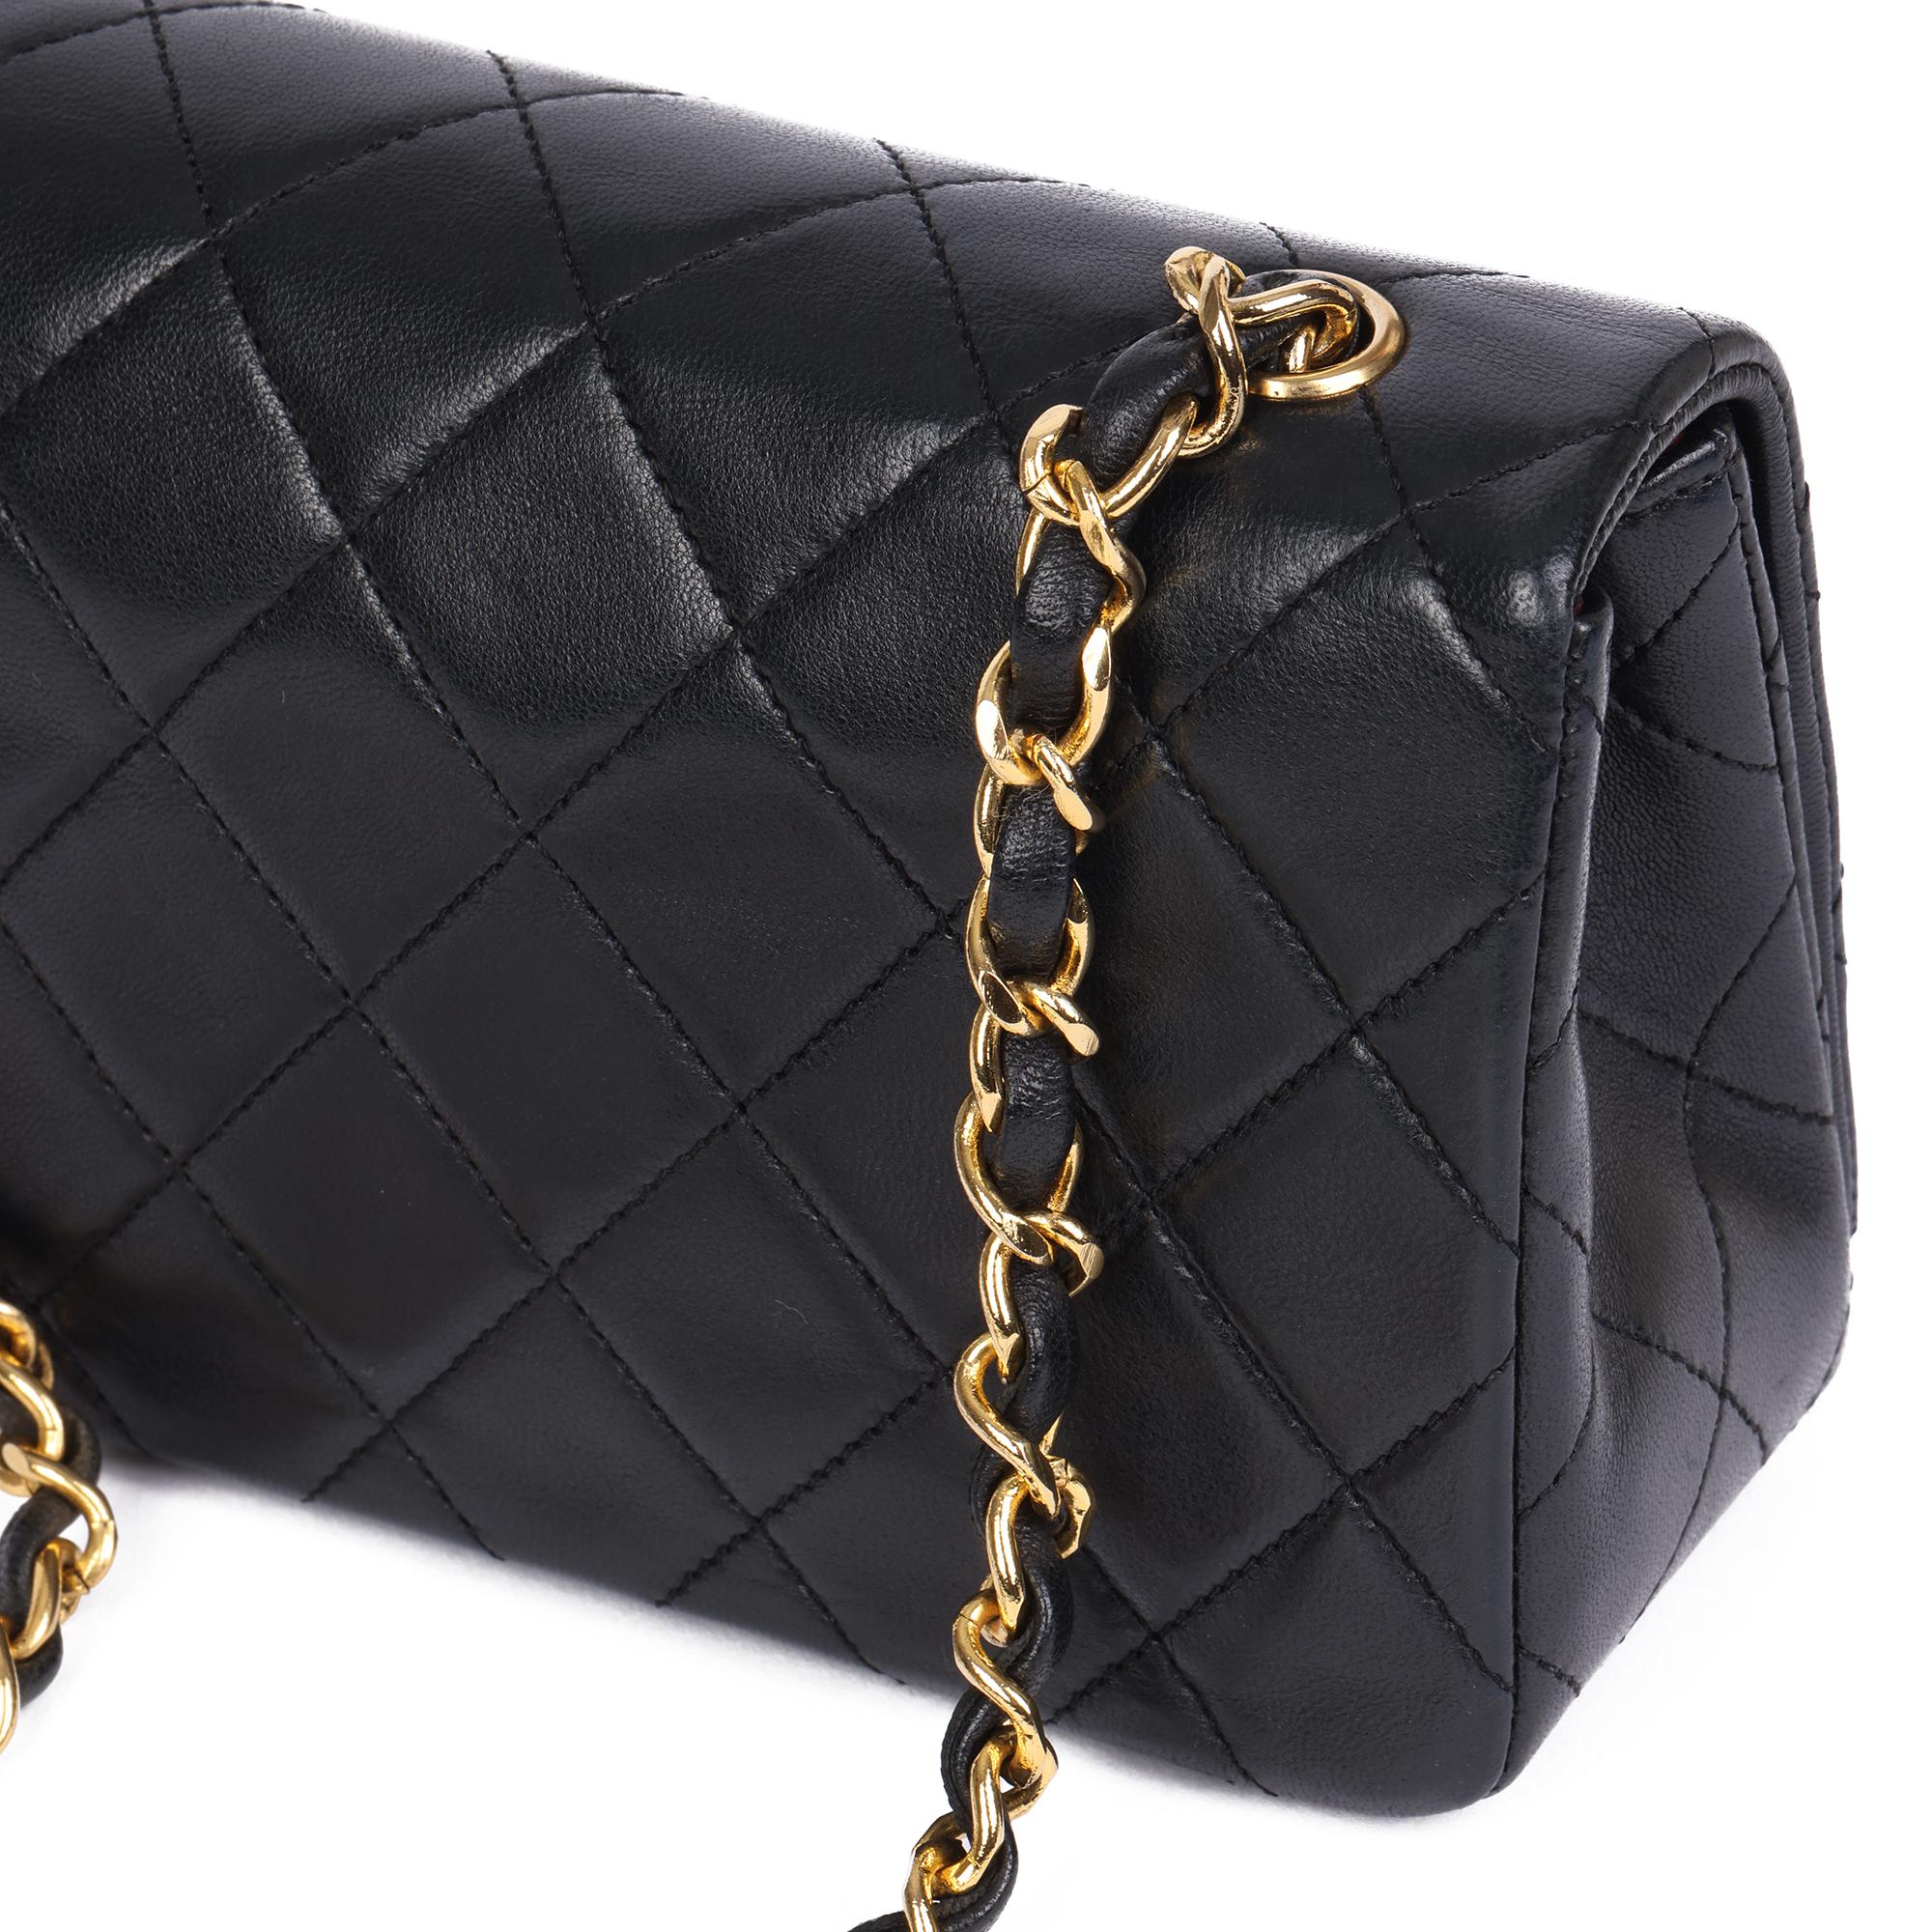 1991 Chanel Black Quilted Lambskin Vintage Mini Full Flap Bag 4